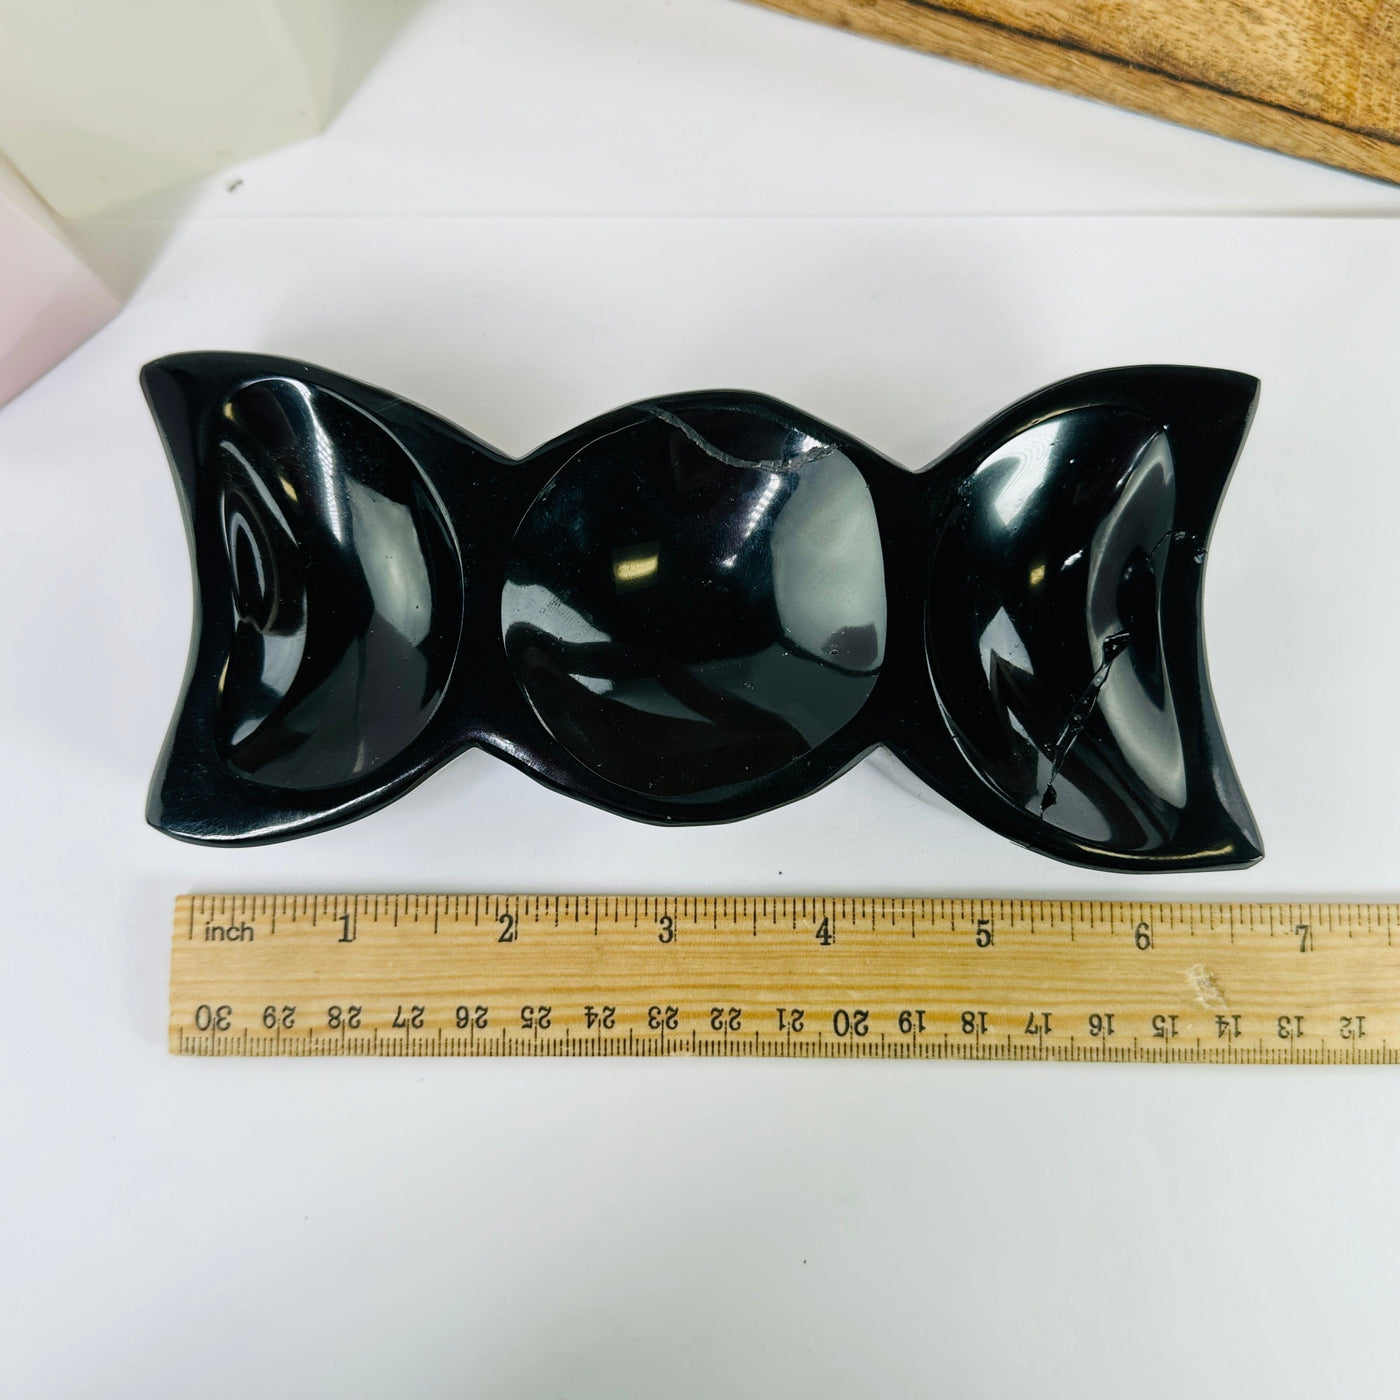 obsidian moon bowl next to a ruler for size reference